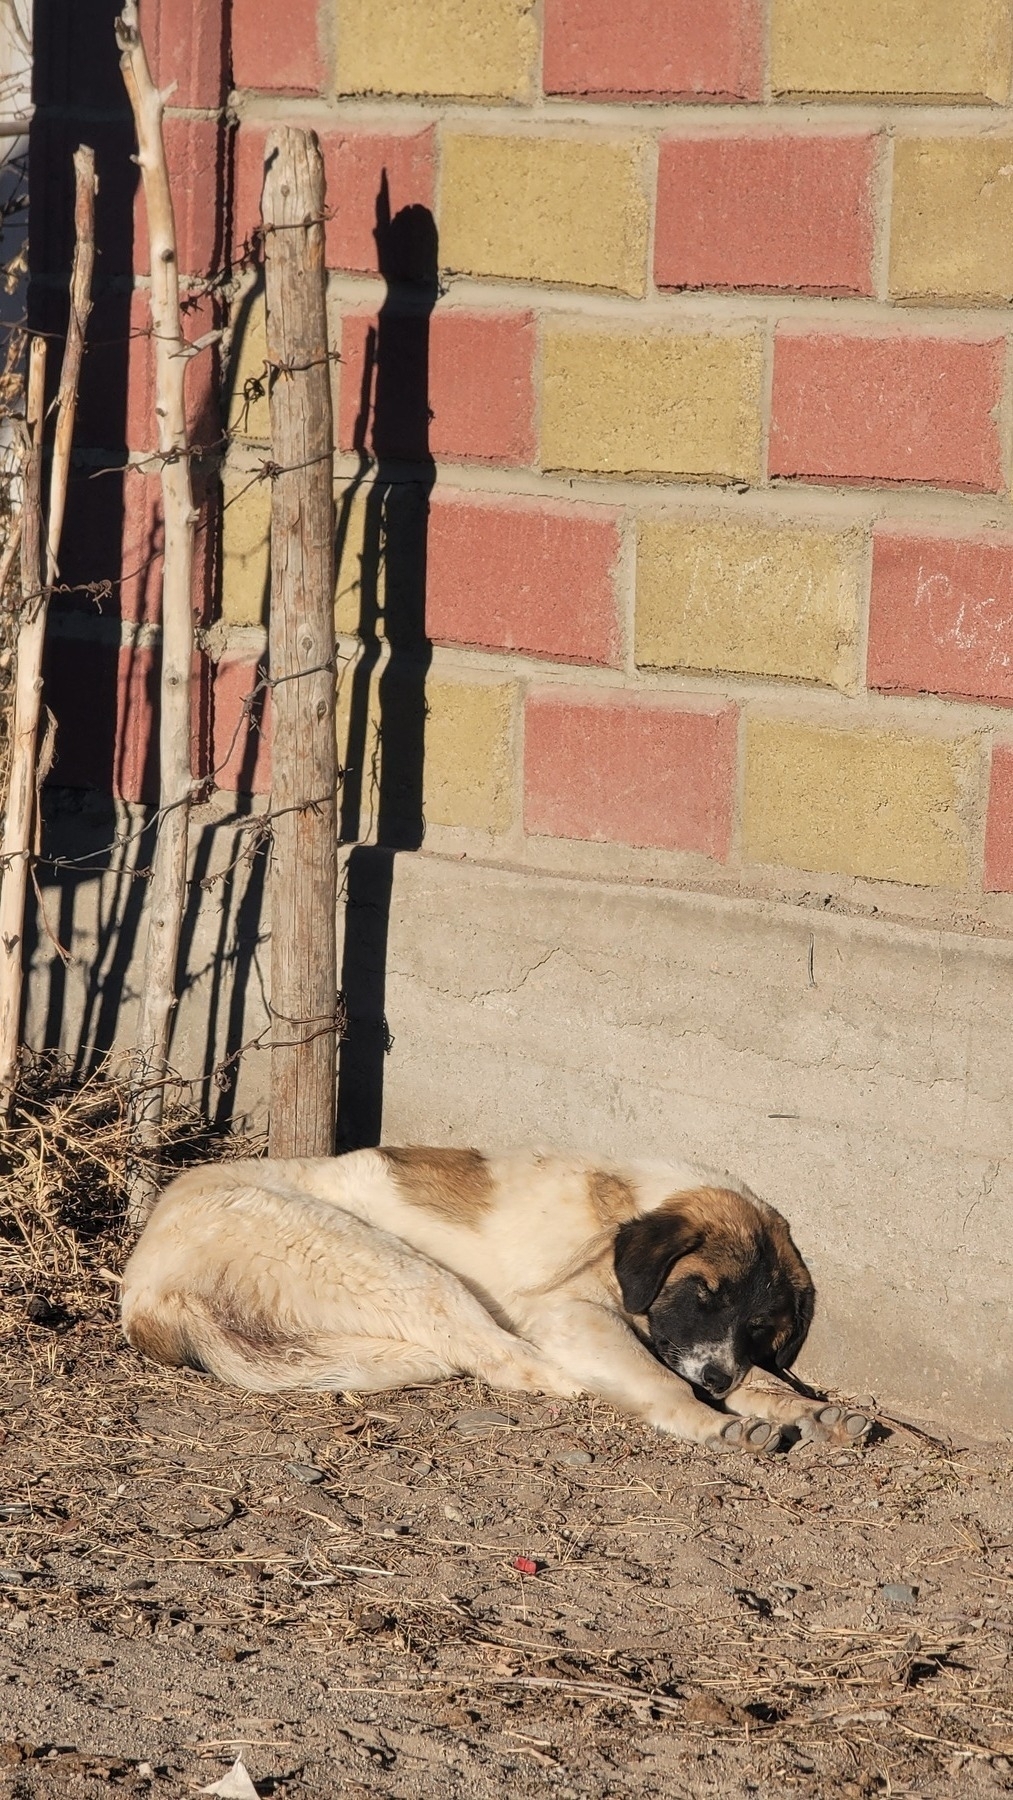 white/cream colored dog with light brown spots on its body and a dark brown and black face sleeping against a red and yellow brick wall next to a barbed wire fence with wooden poles